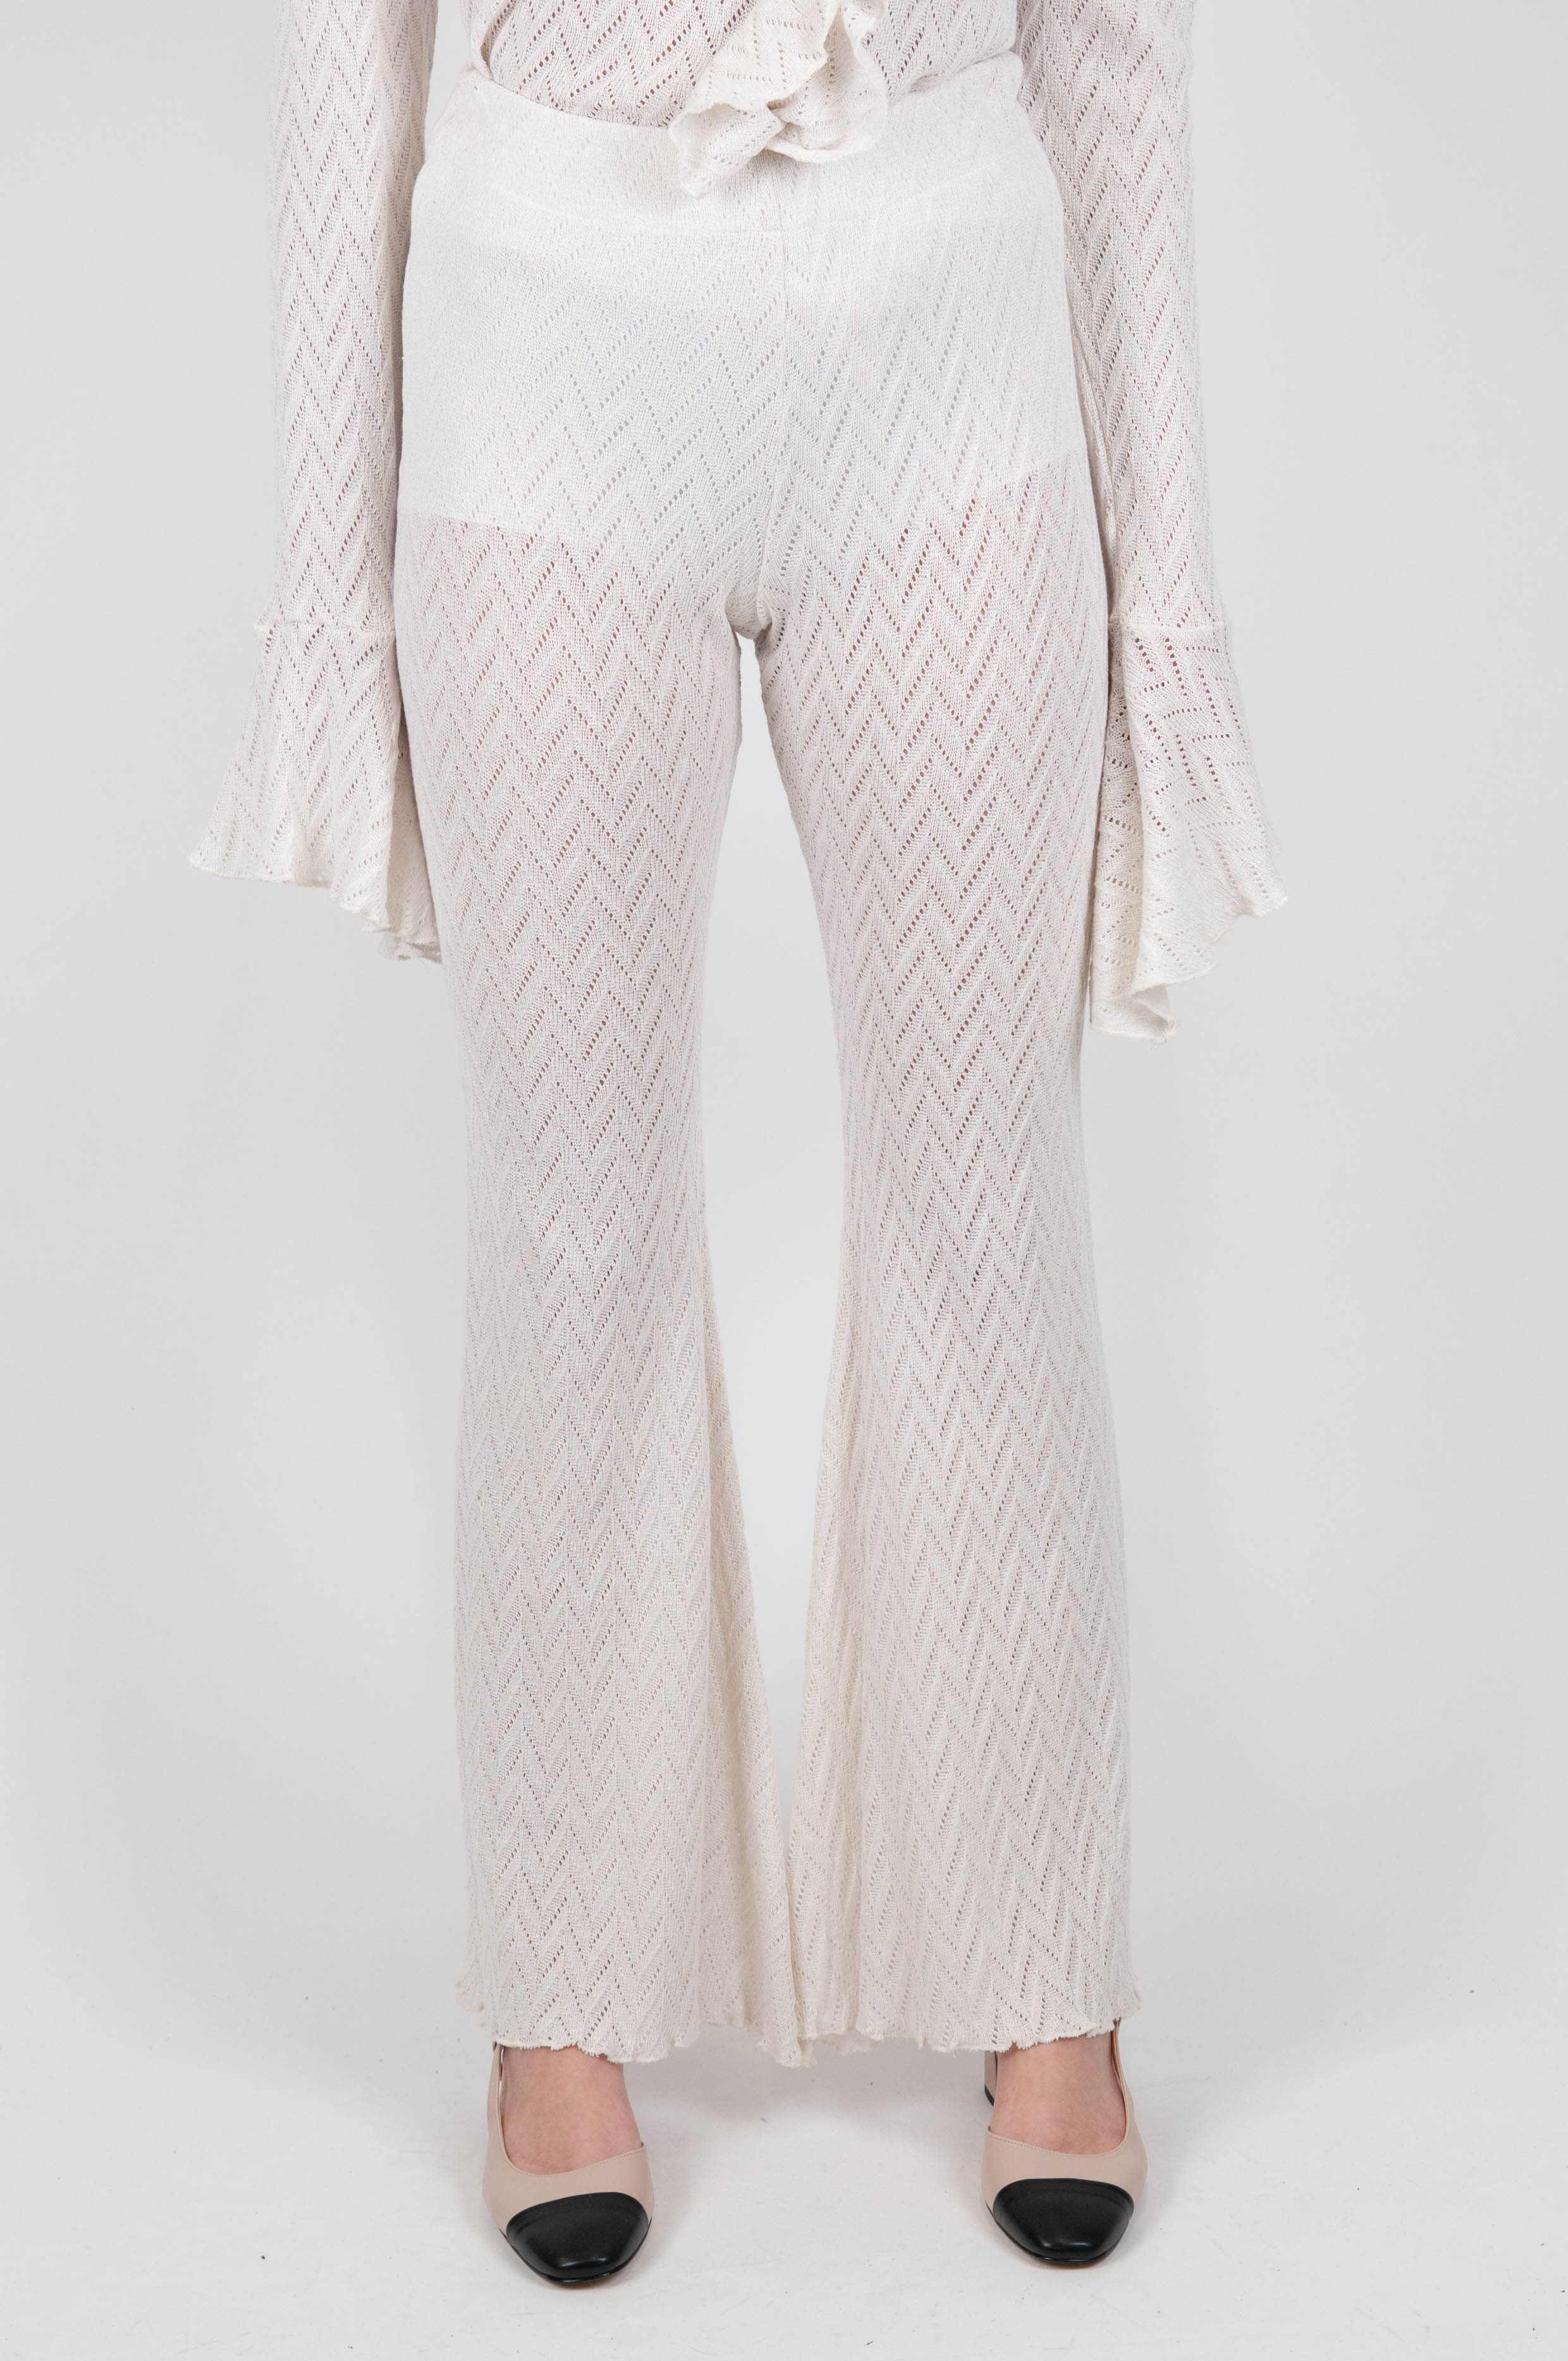 Haveone - Zig zag patterned flared trousers